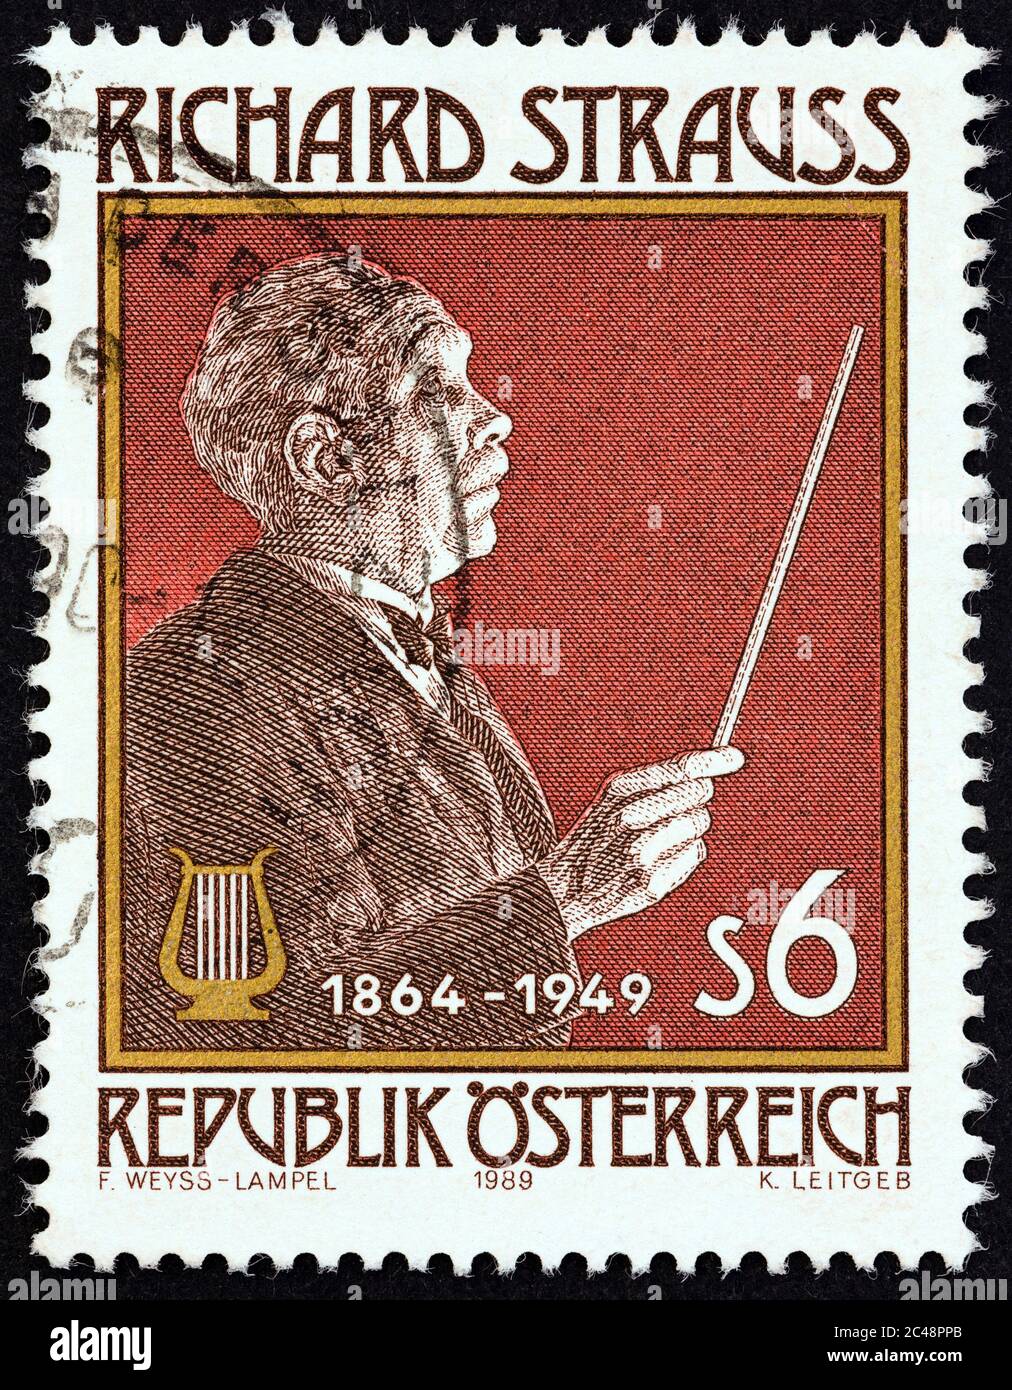 AUSTRIA - CIRCA 1989: A stamp printed in Austria issued for the 125th birth anniversary of Richard Strauss shows Richard Strauss (composer) Stock Photo